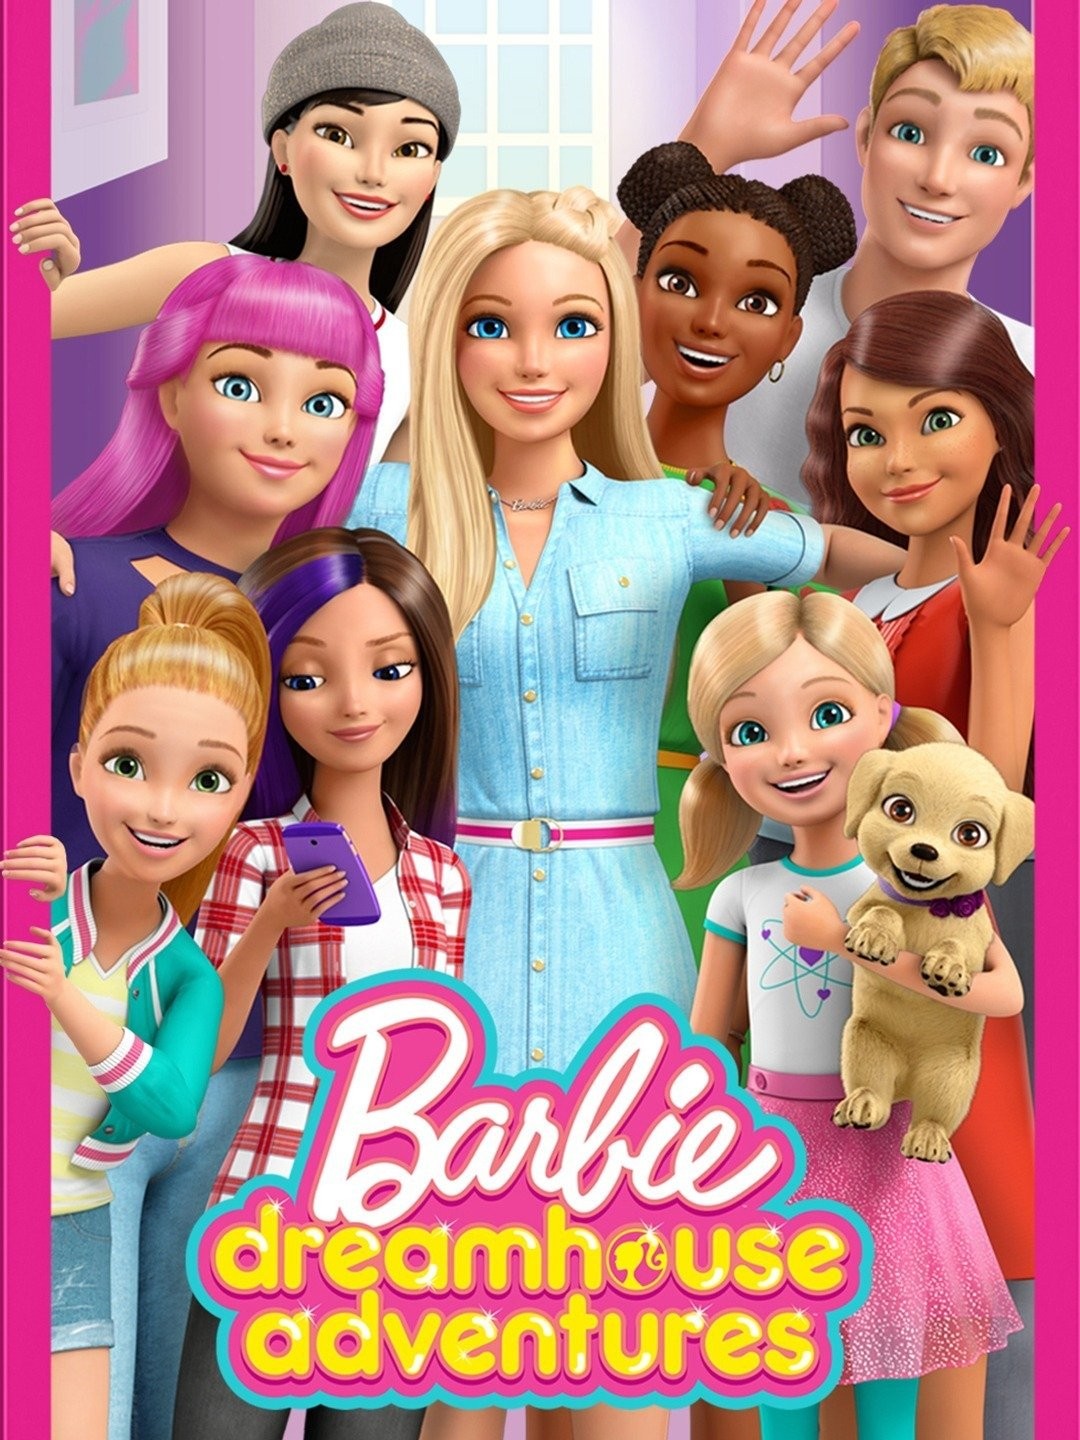 Barbie Dreamhouse Challenge - Rotten Tomatoes